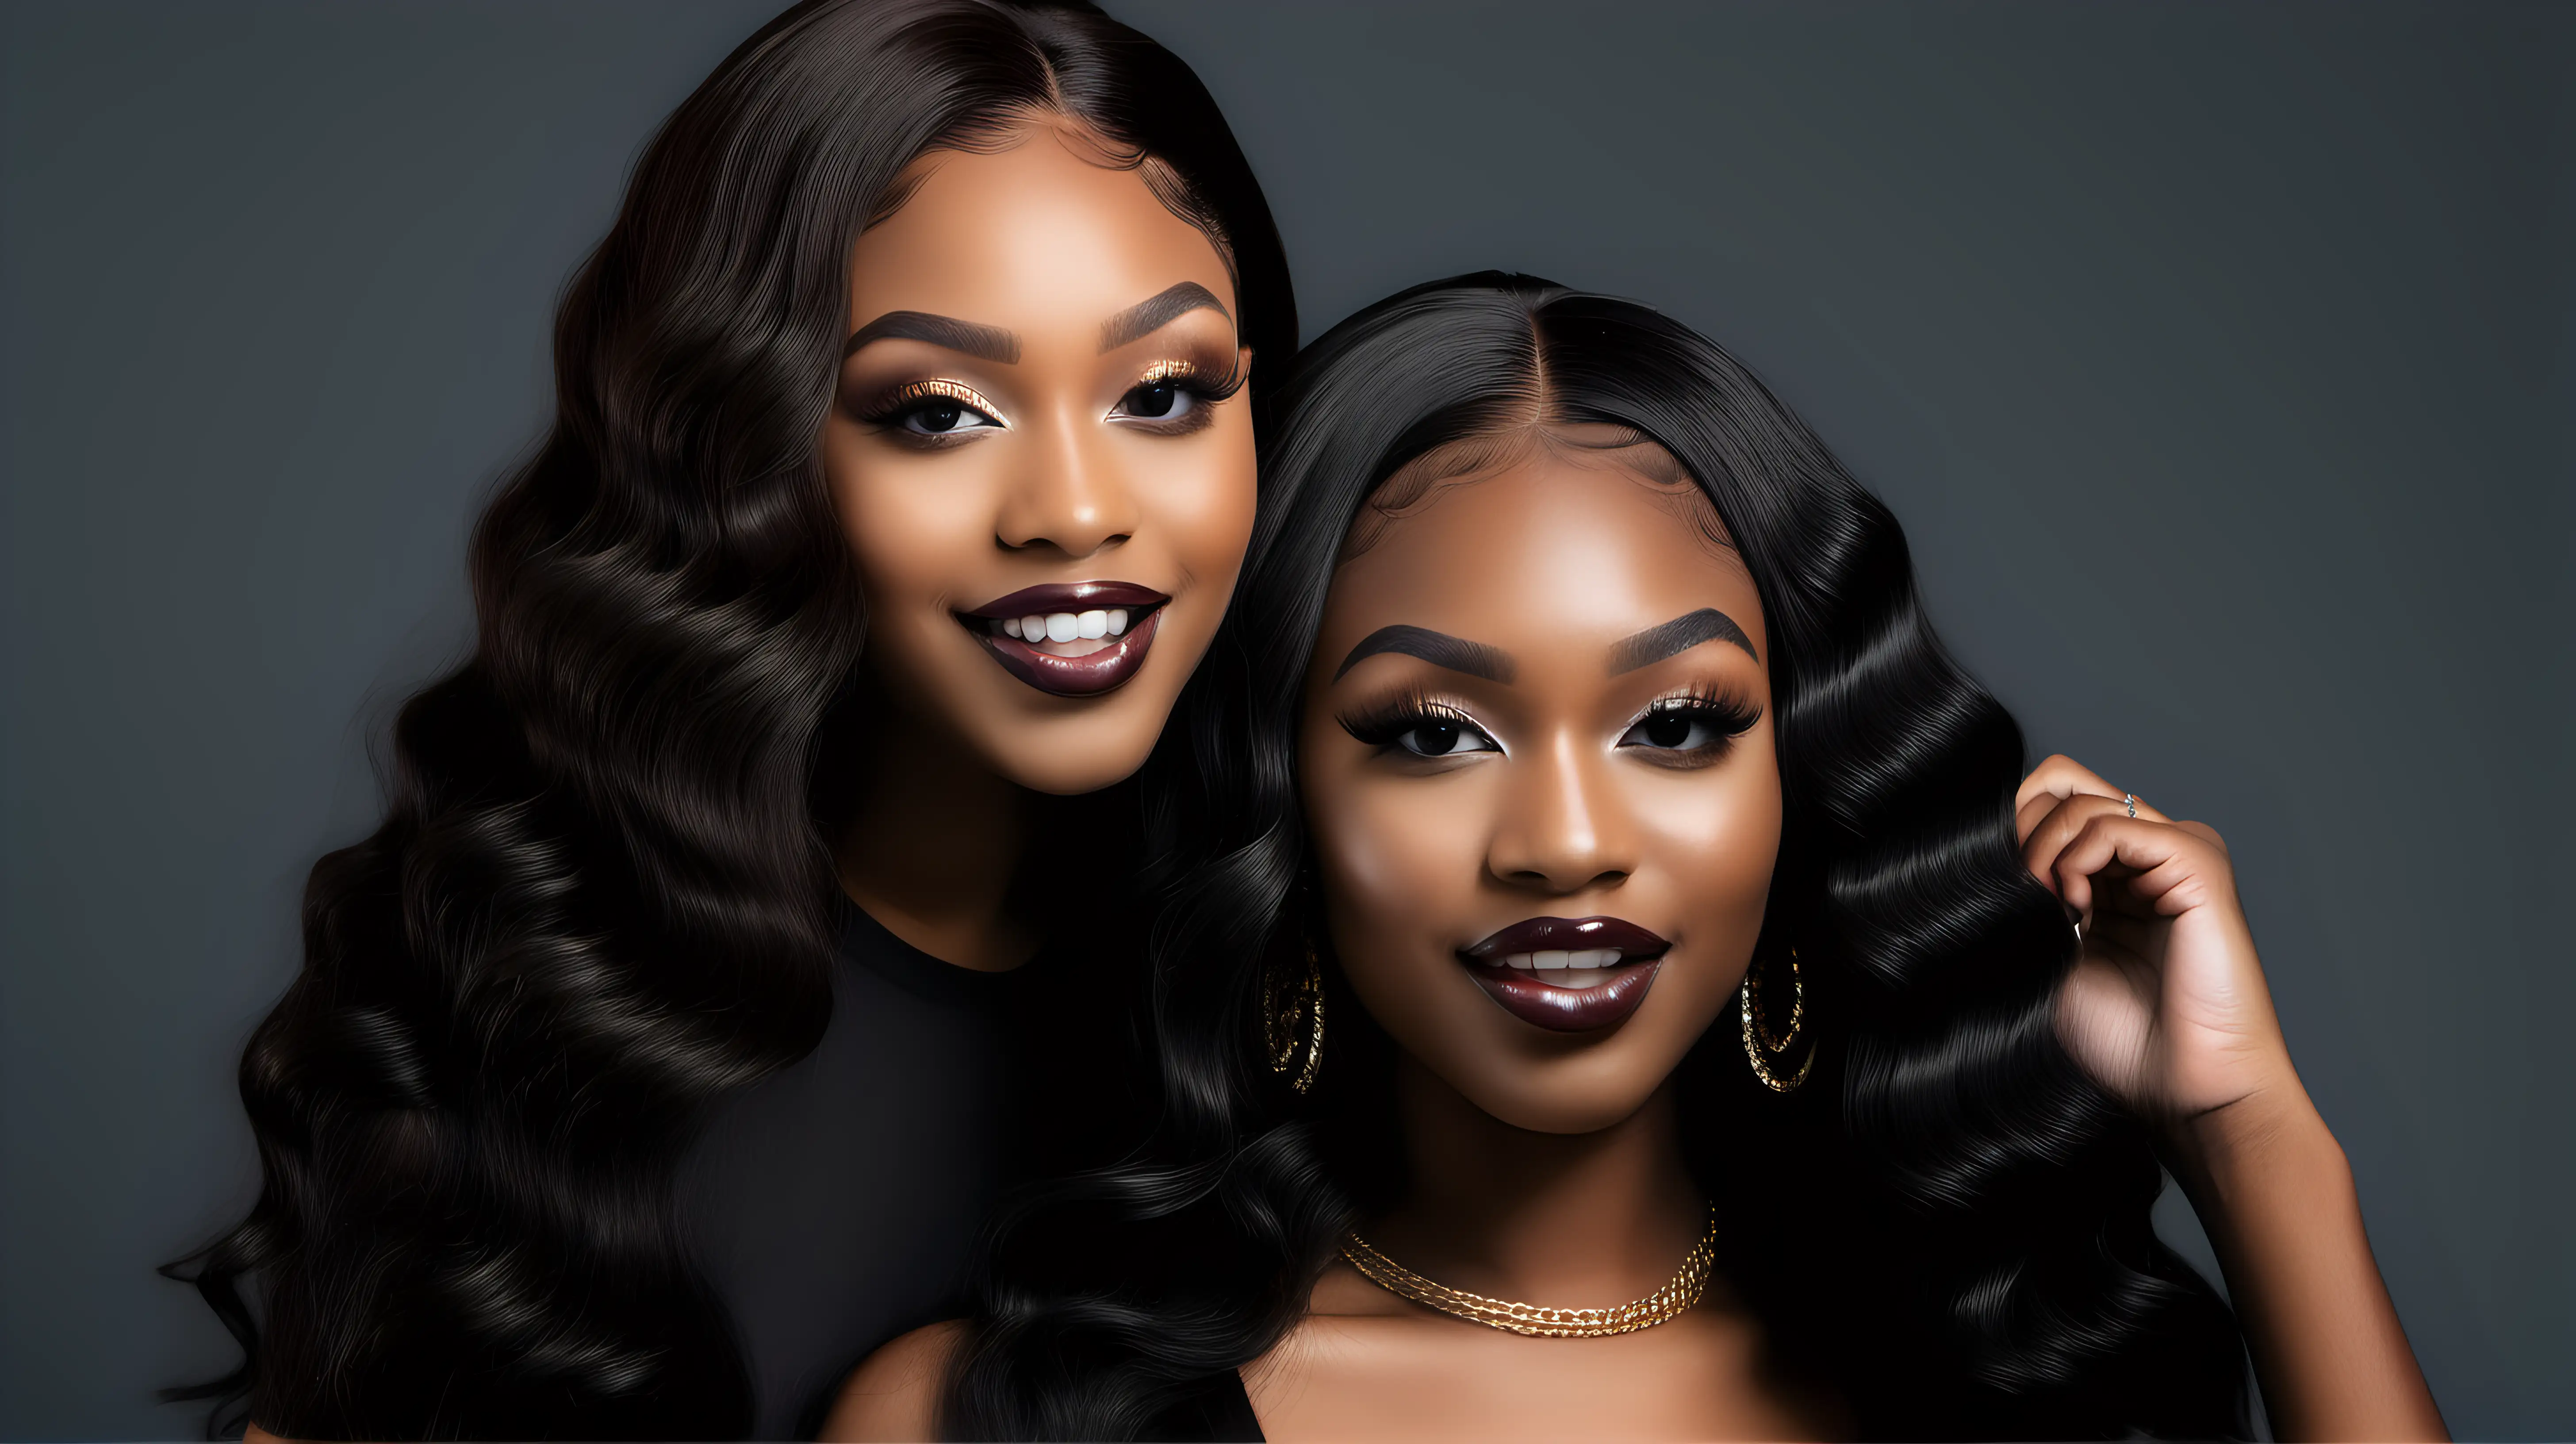 two beautiful young black women coordinating outfits of the same color, with big lips glam makeup and silky straight HD lace wigs, thick full eyelashes and gold jewelry, a photoshoot for a hair boutique for 18 to 25 -year -olds, long hair and glam makeup, Fashion Nova vibe, photorealistic, high detailed, glam, hd photography, fashion
nova clothing, boutique made clothes, brazilian wavy lace frontal 2b, in the style
of haunting elegance, chiaroscuro mastery, playful yet dark, iconic, high
gloss, nature - inspired, bold shadows, black woman, smiling with veneers
